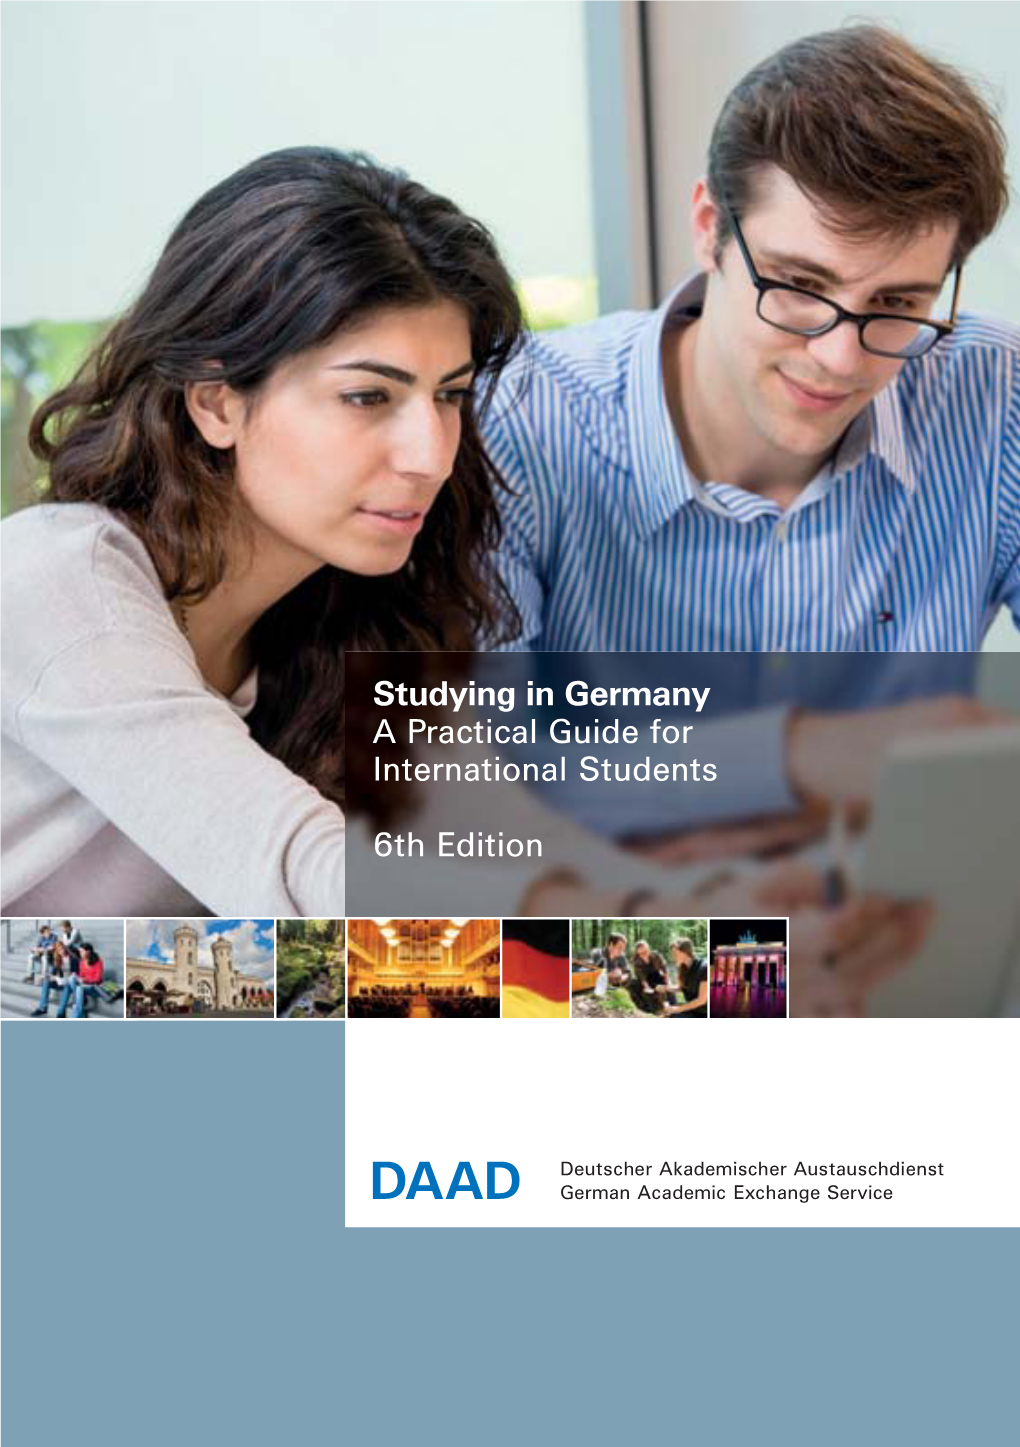 Studying in Germany – a Practical Guide for International Students